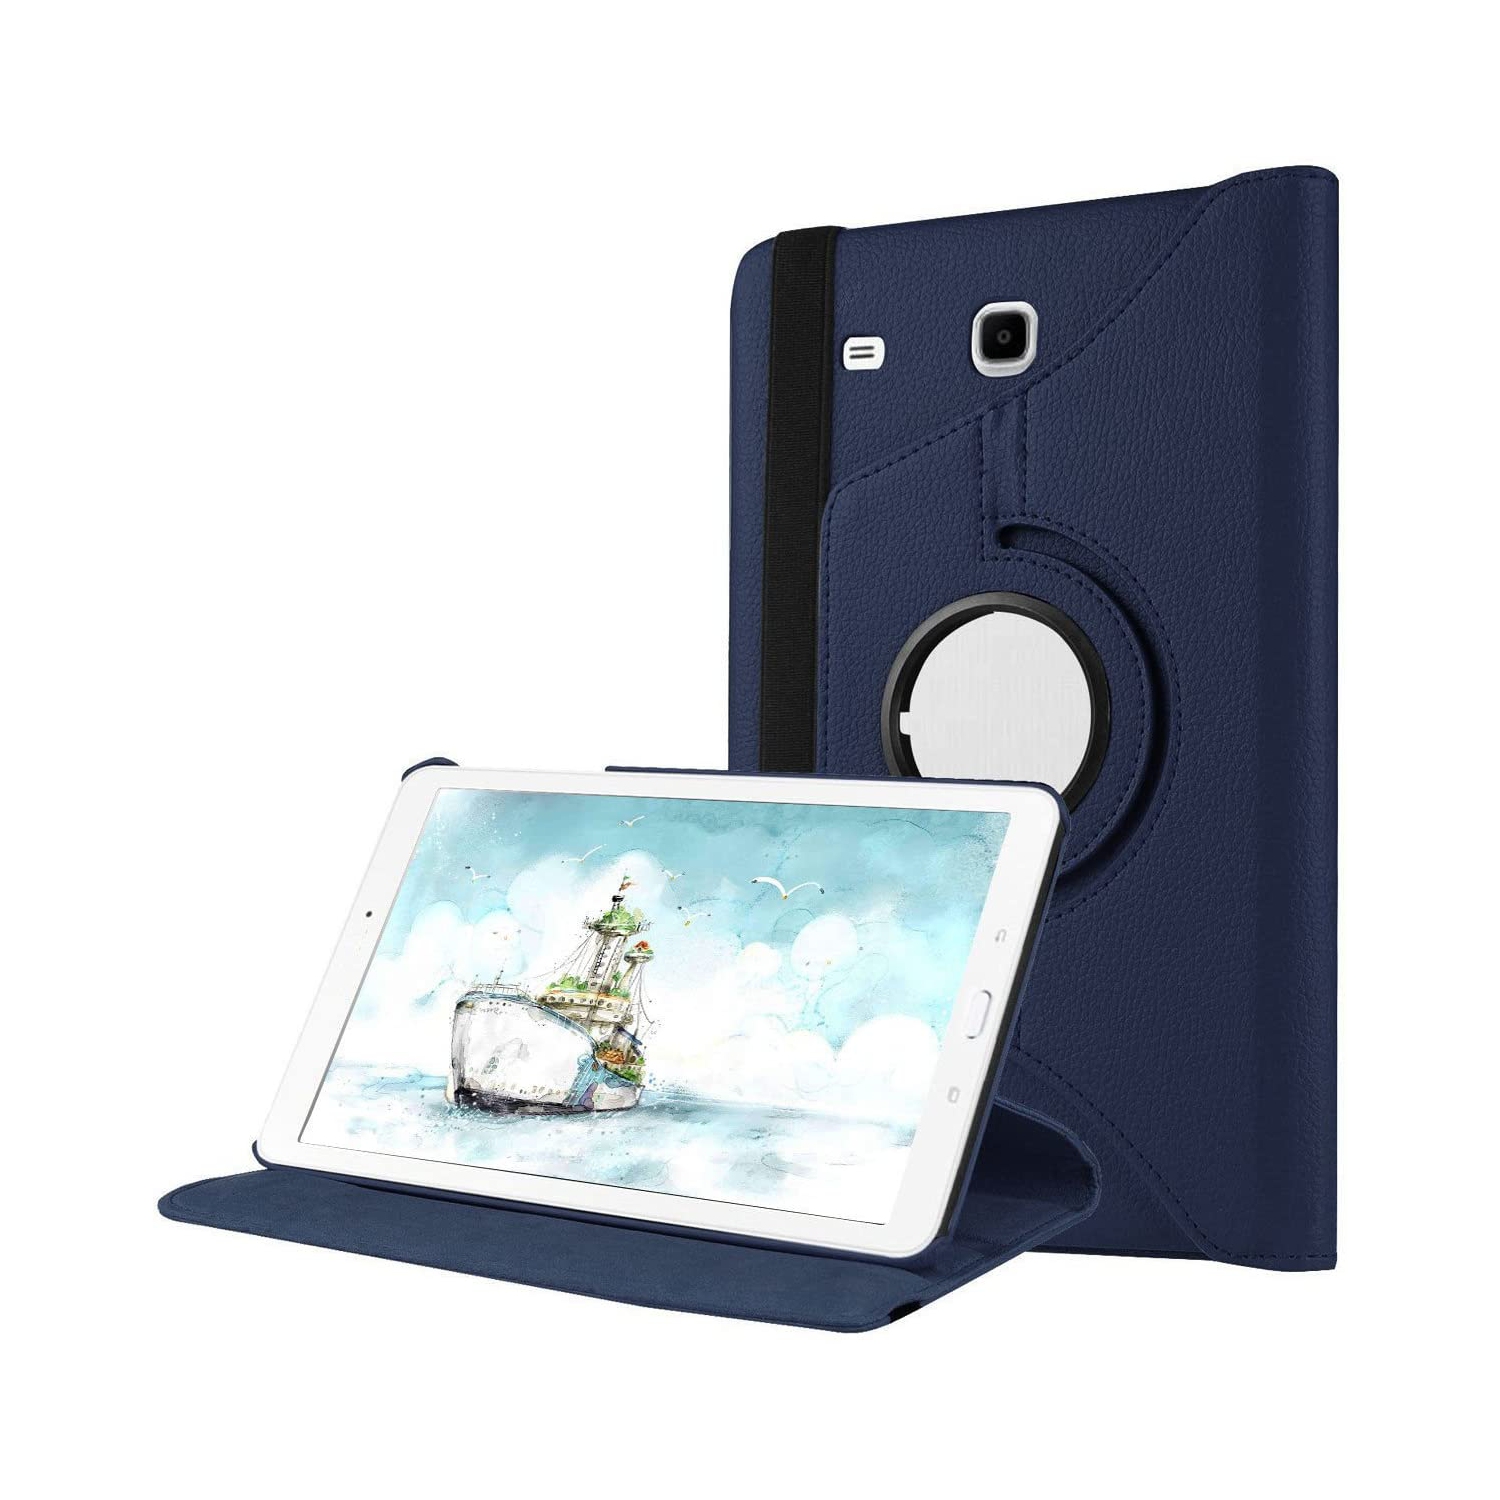 【CSmart】 360 Rotating Leather Tablet Case Smart Stand Cover for Samsung Tab E 9.6" T560 T561 T565, Navy